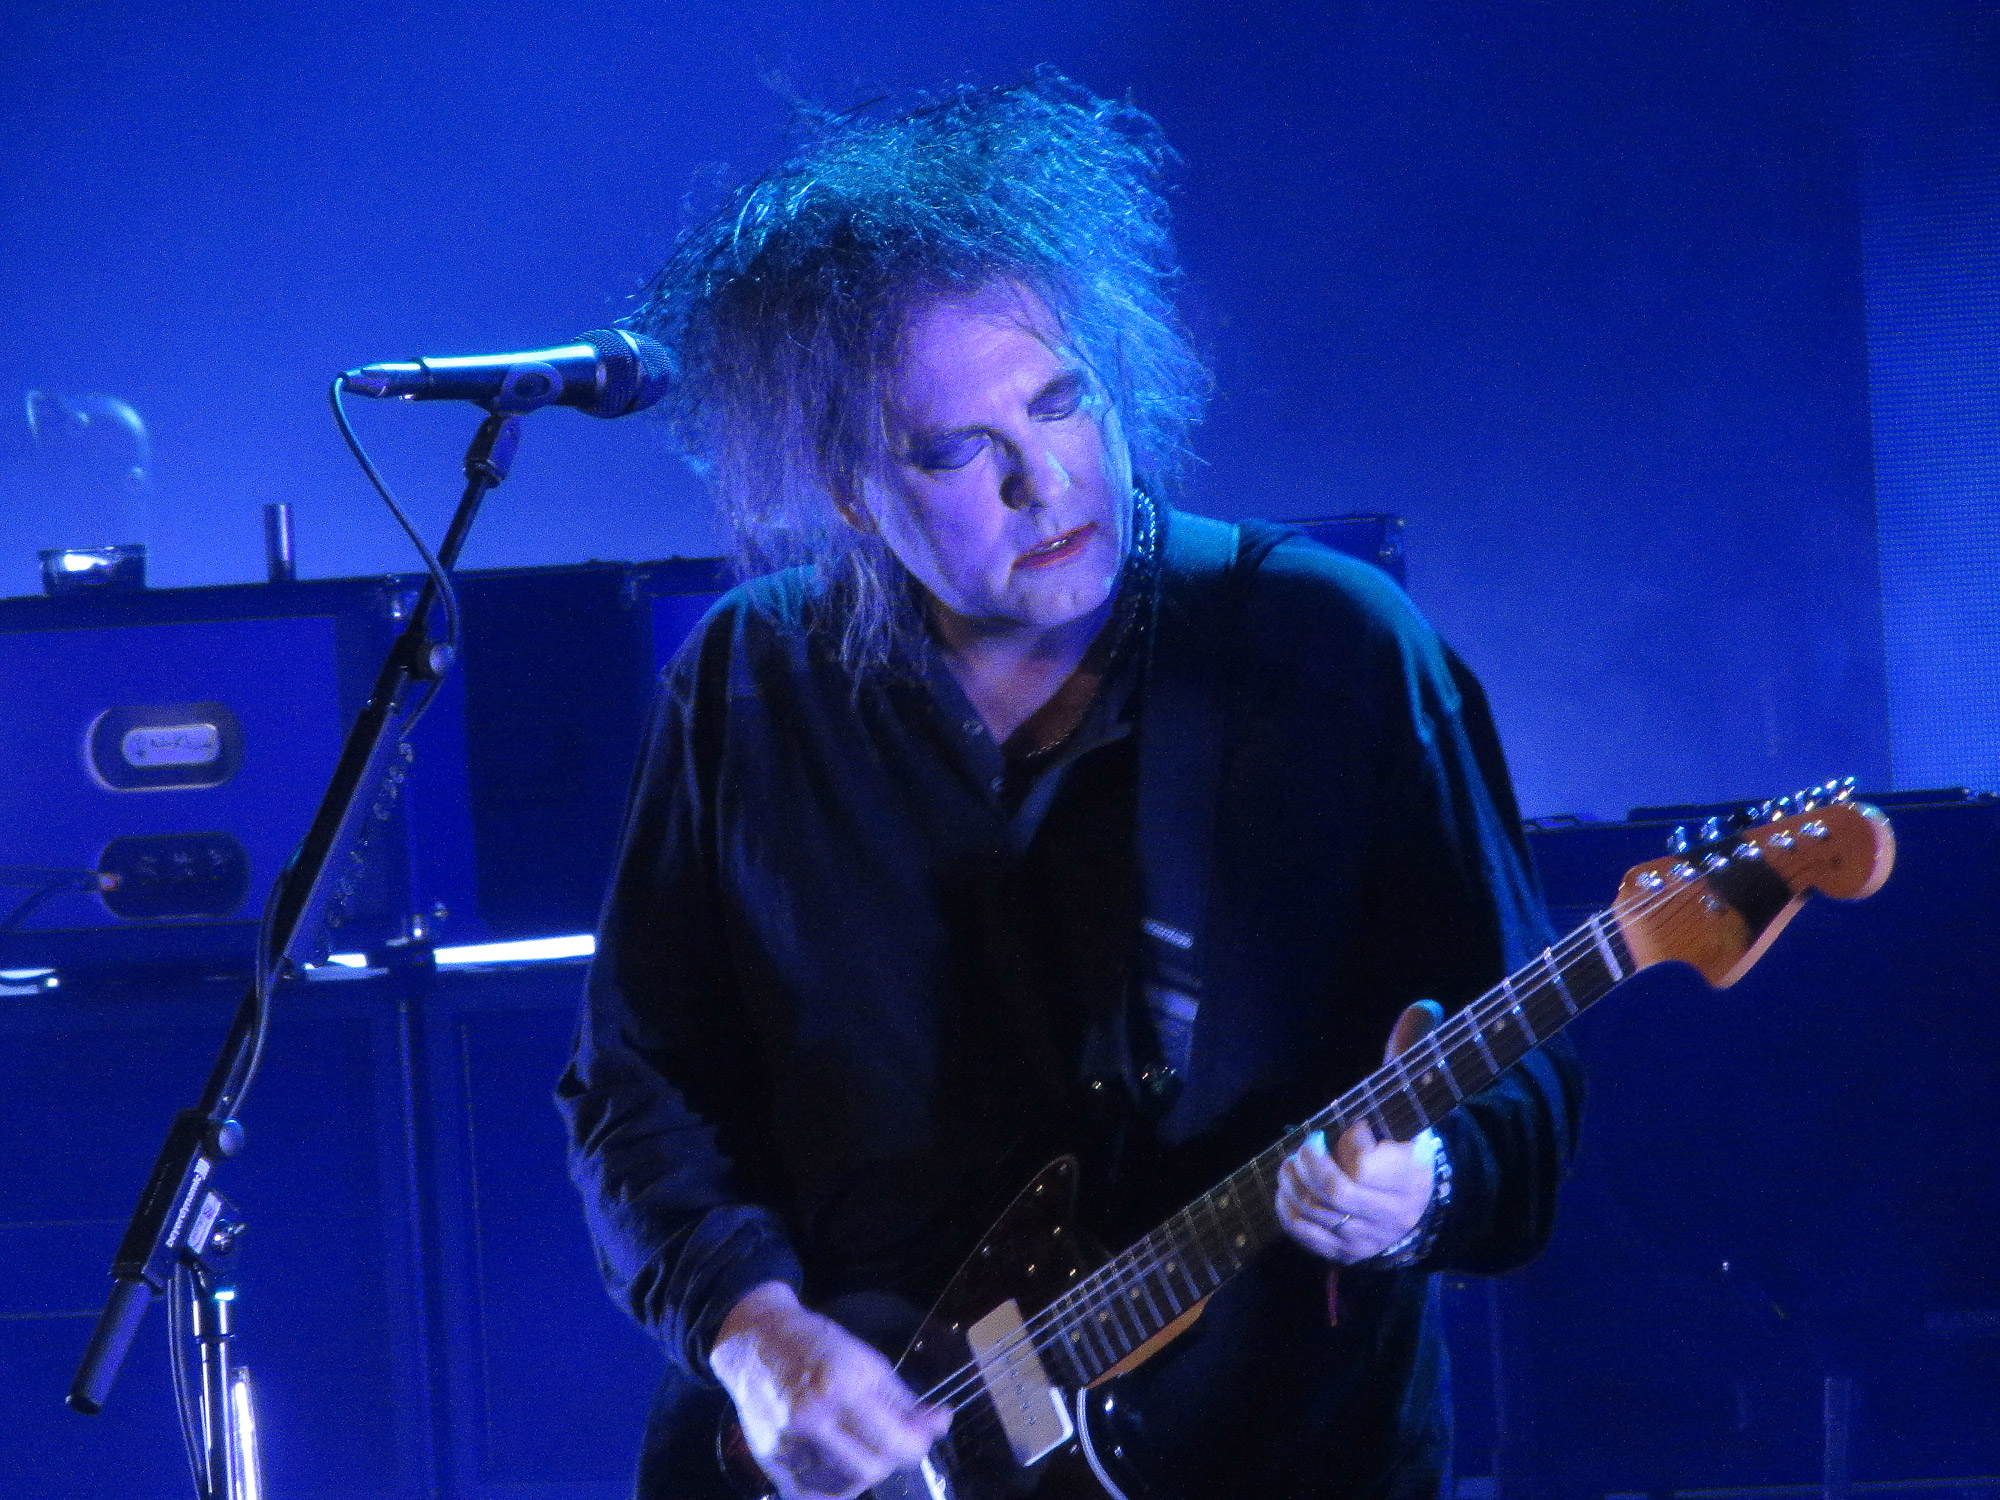 On a blue-lit stage, behind a microphone, a man with unkempt dark hair plays guitar. He is wearing make-up. 